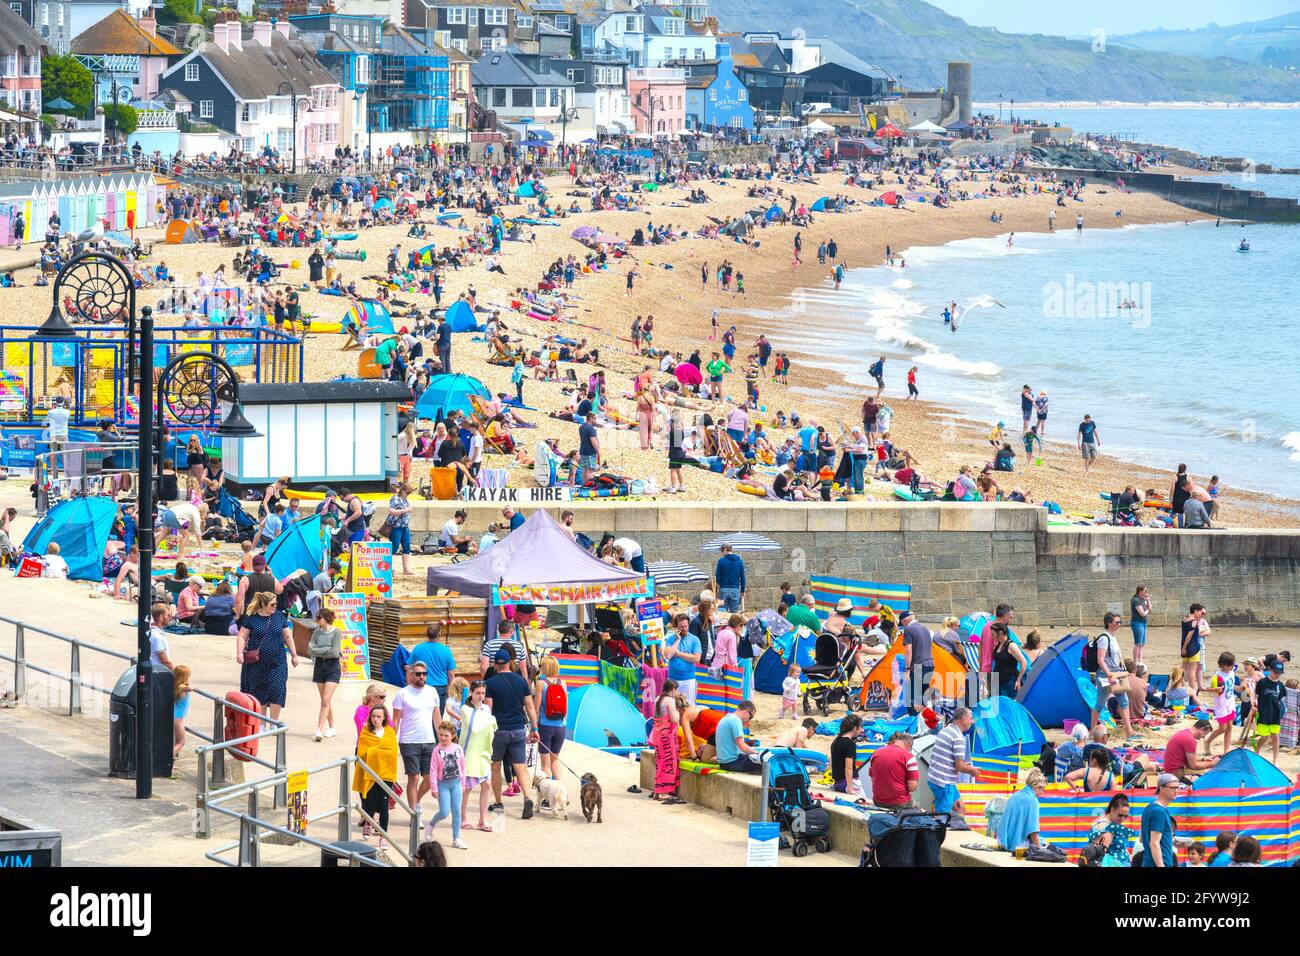 Lyme Regis, Dorset, UK. 30th May, 2021. UK Weather. Beaches and car parks are packed at the seaside resort of Lyme Regis on the bank holiday weekend as visitors flock to the beach to enjoy scorching hot sunsine as the heatwave continues. Credit: Celia McMahon/Alamy Live News Stock Photo